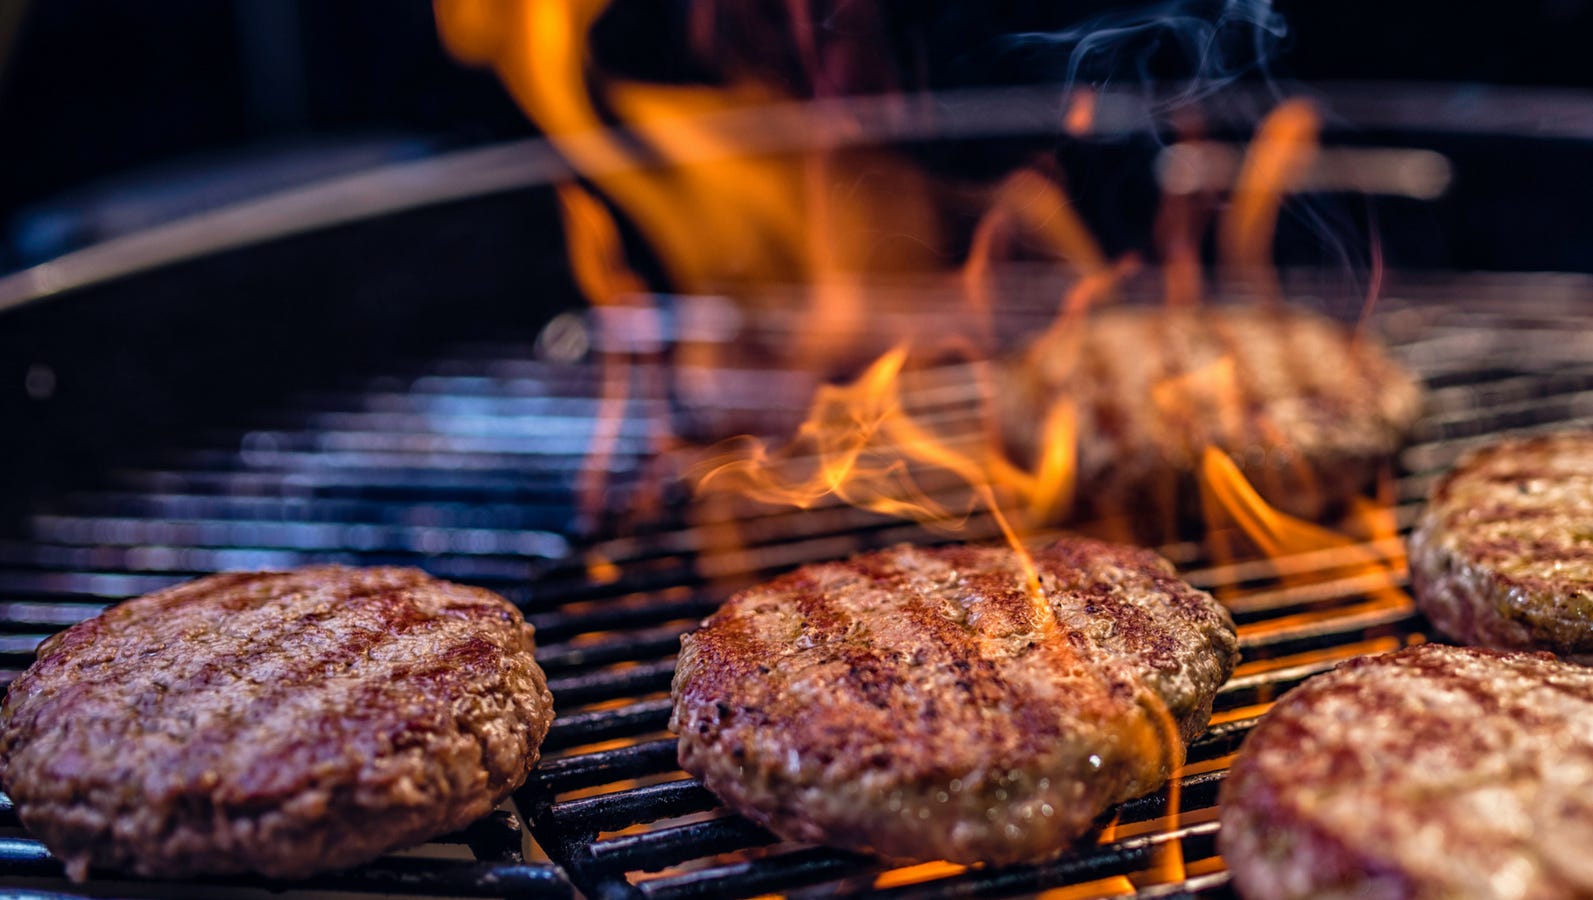 How To Grill Burgers Properly Doing It Wrong Could Actually Kill You 